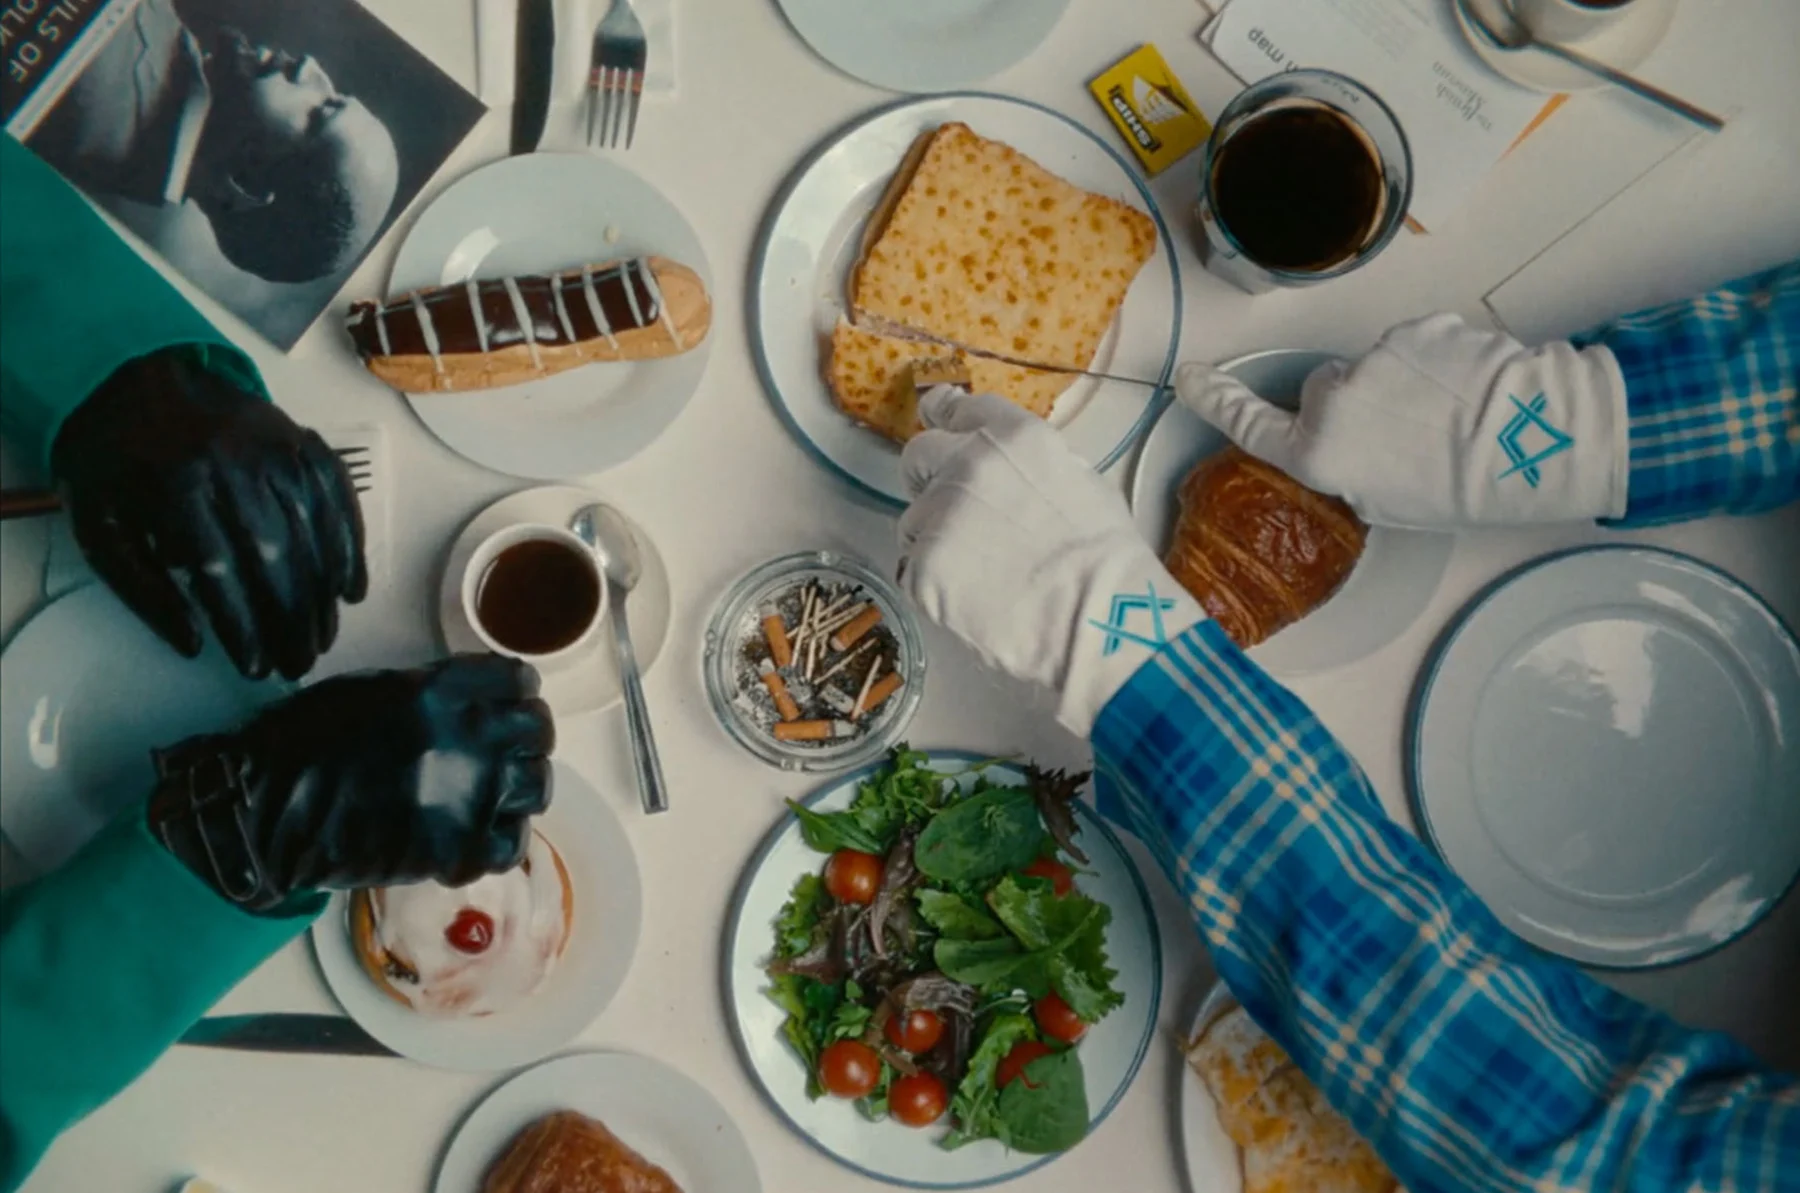 An aerial shot of a table at a restaurant. One set of hands comes in from off screen, cutting into a piece of food with a knife and fork, as another pair of hands rest on the table to the left.